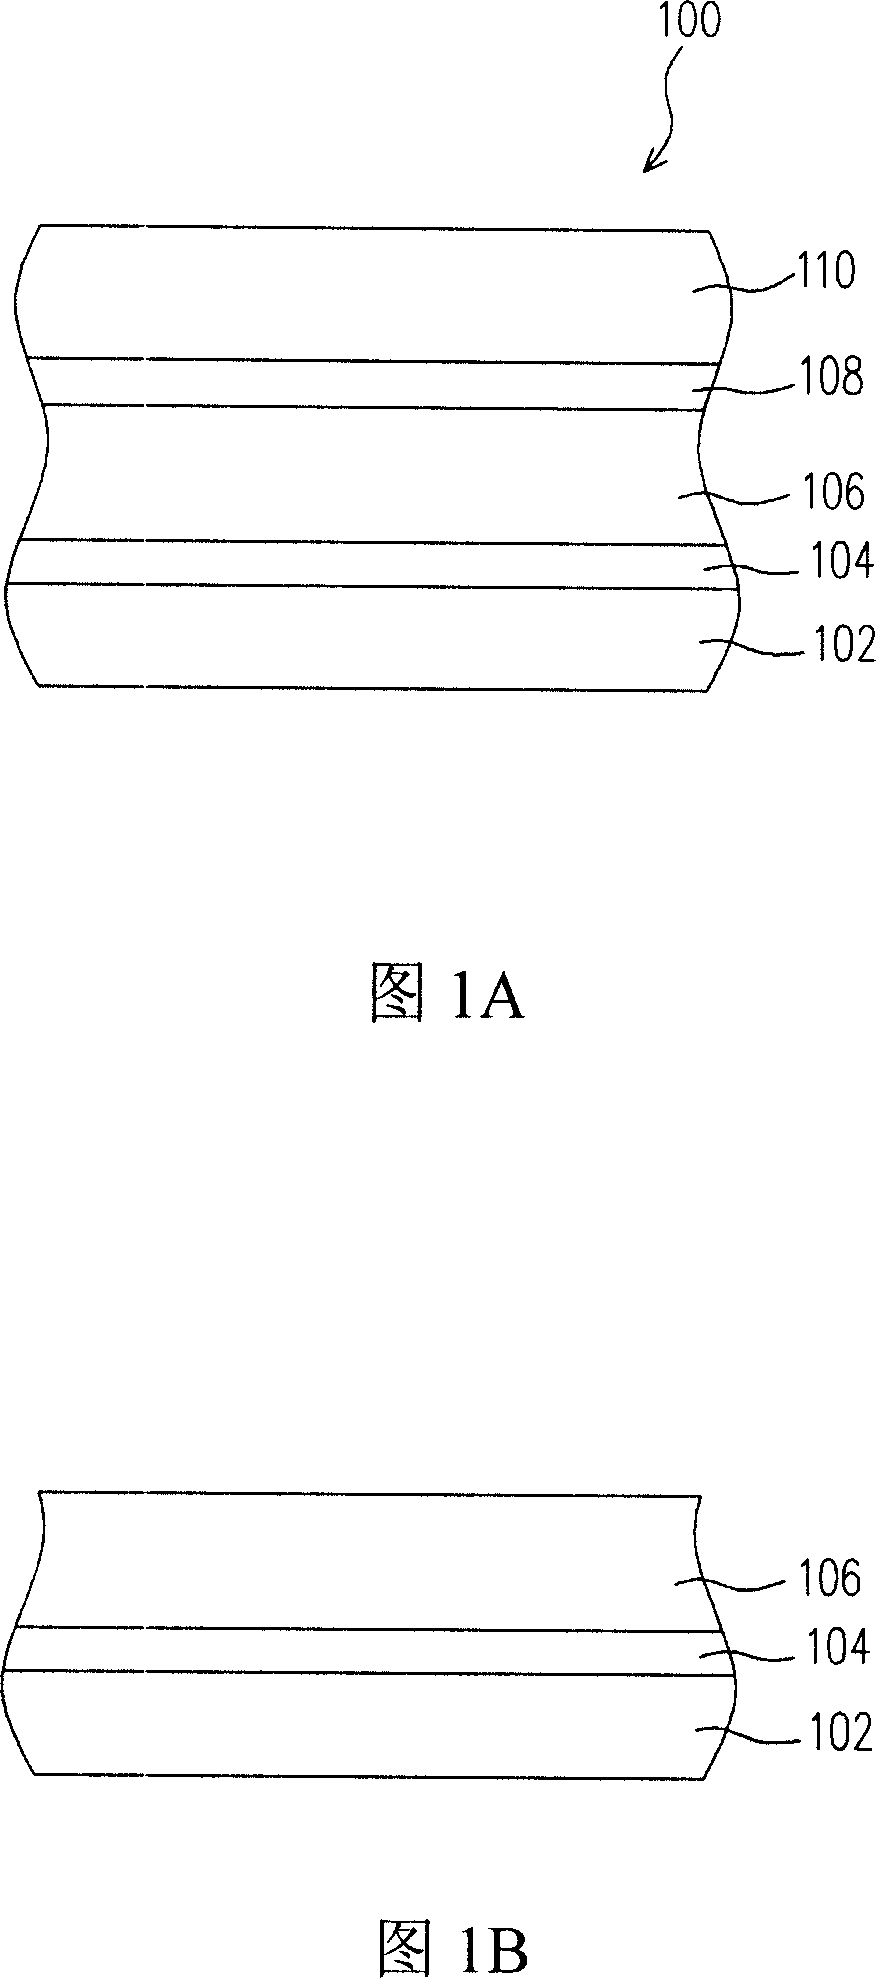 Method and system for testing flexible elements